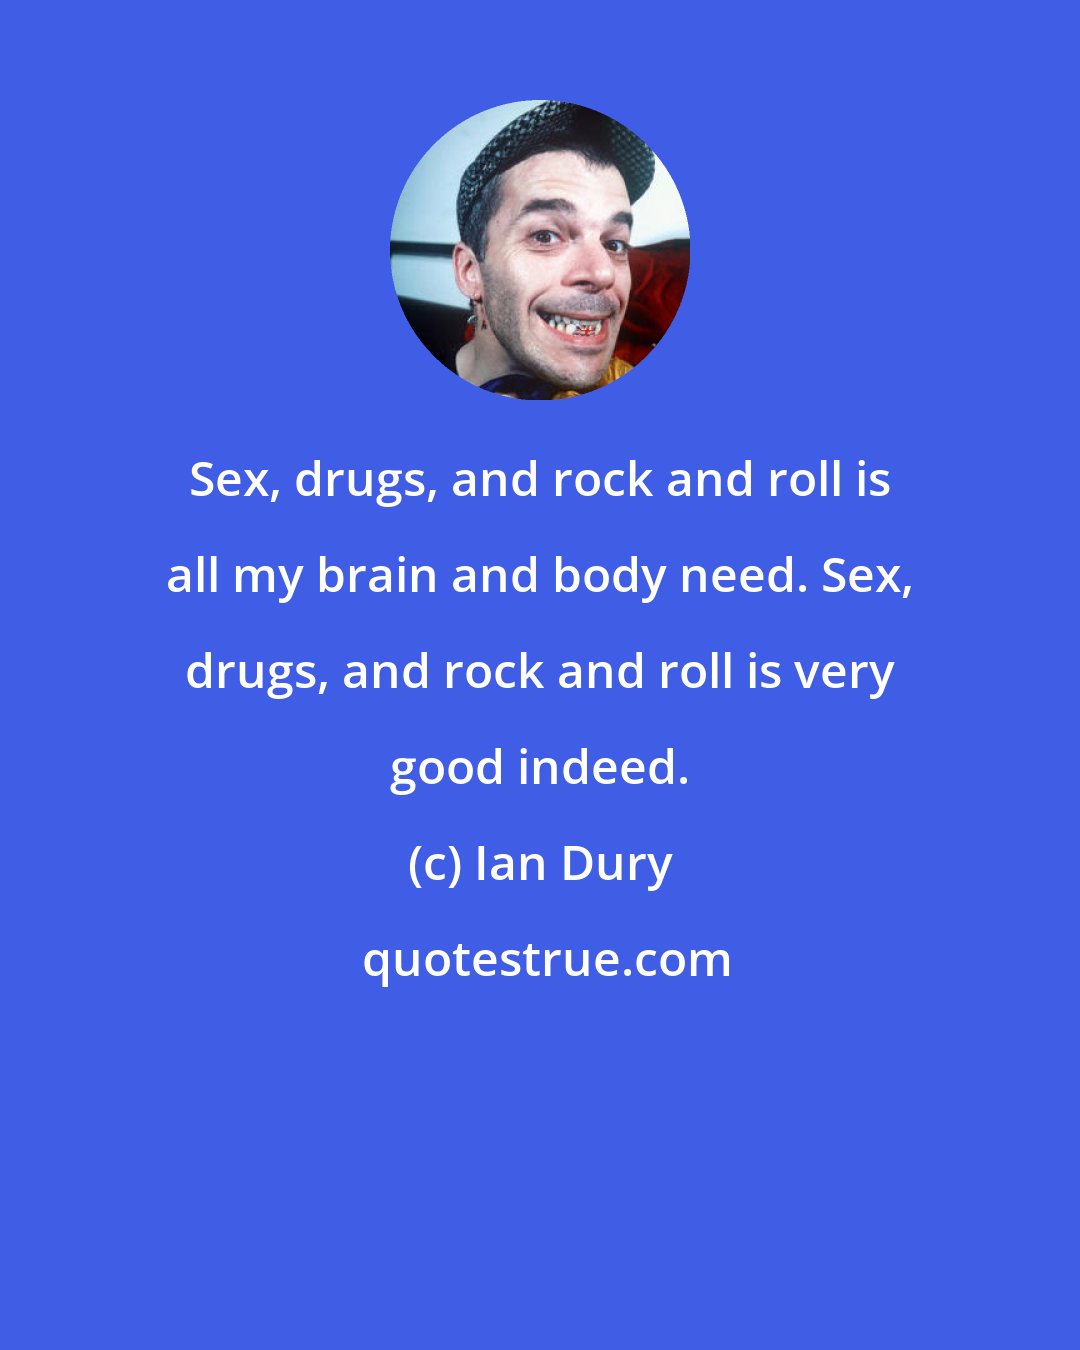 Ian Dury: Sex, drugs, and rock and roll is all my brain and body need. Sex, drugs, and rock and roll is very good indeed.